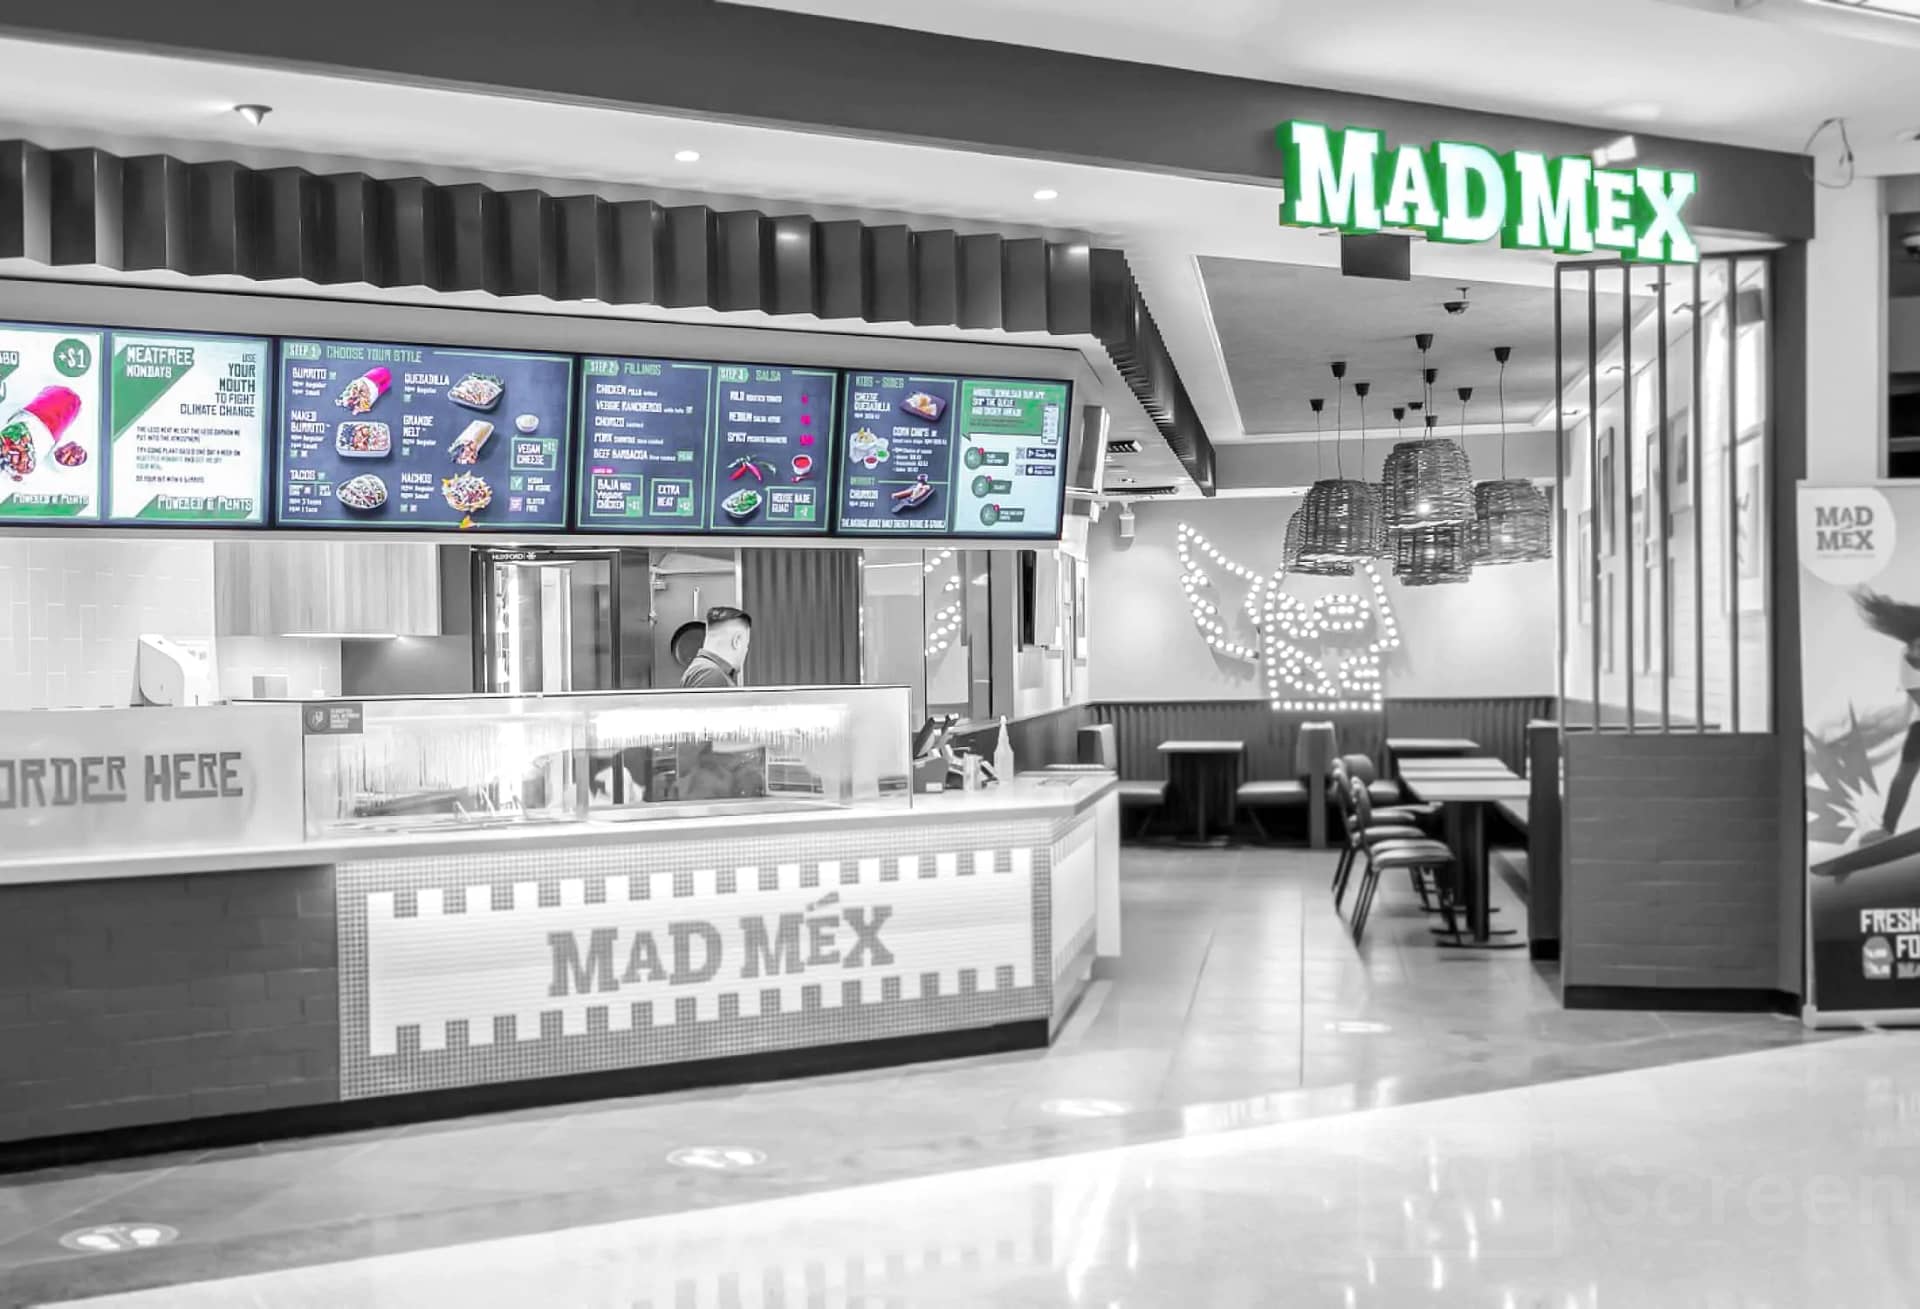 digital signage for restaurant promotions and marketing